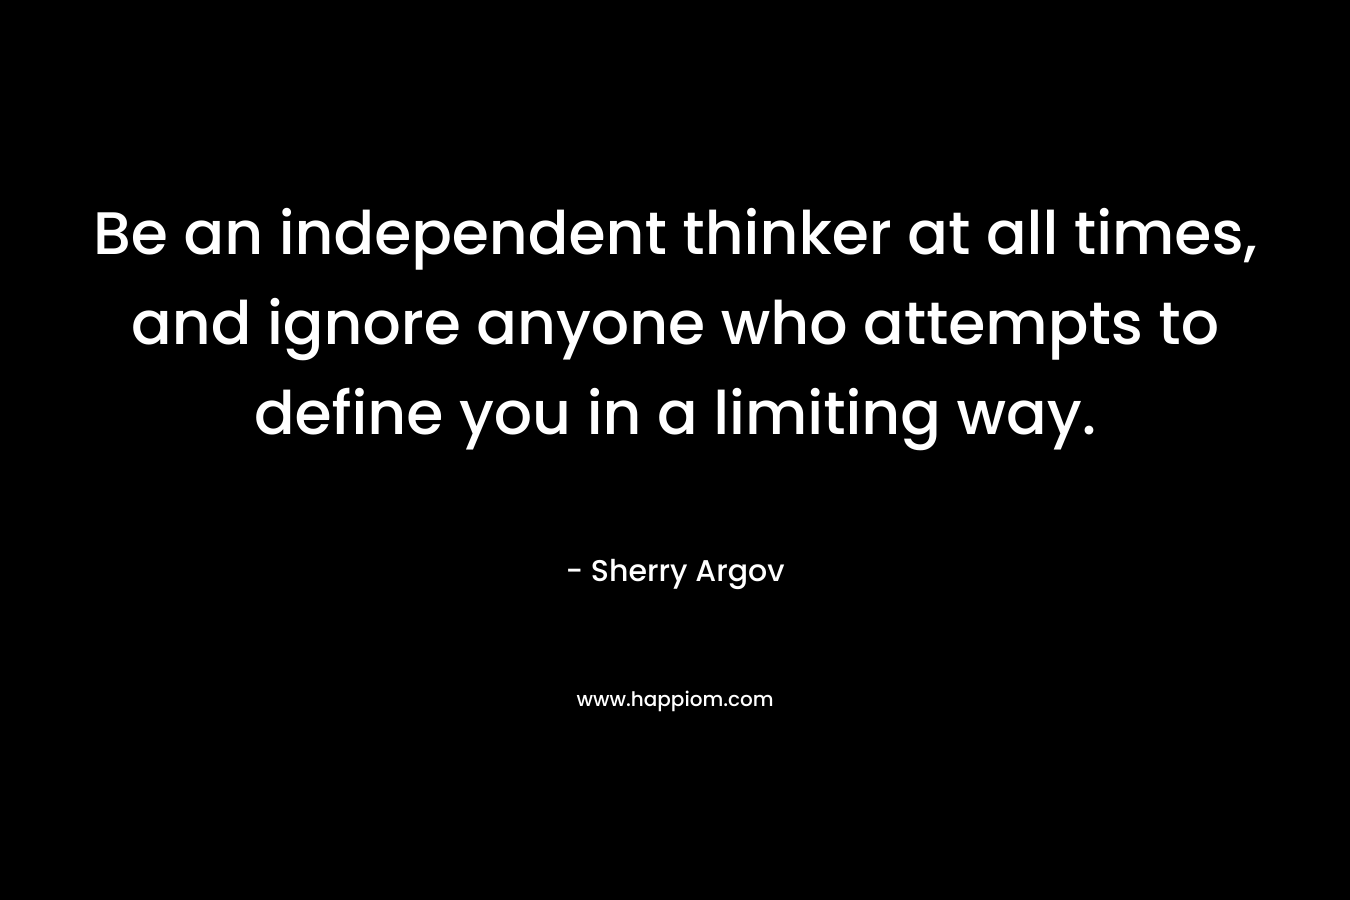 Be an independent thinker at all times, and ignore anyone who attempts to define you in a limiting way. – Sherry Argov